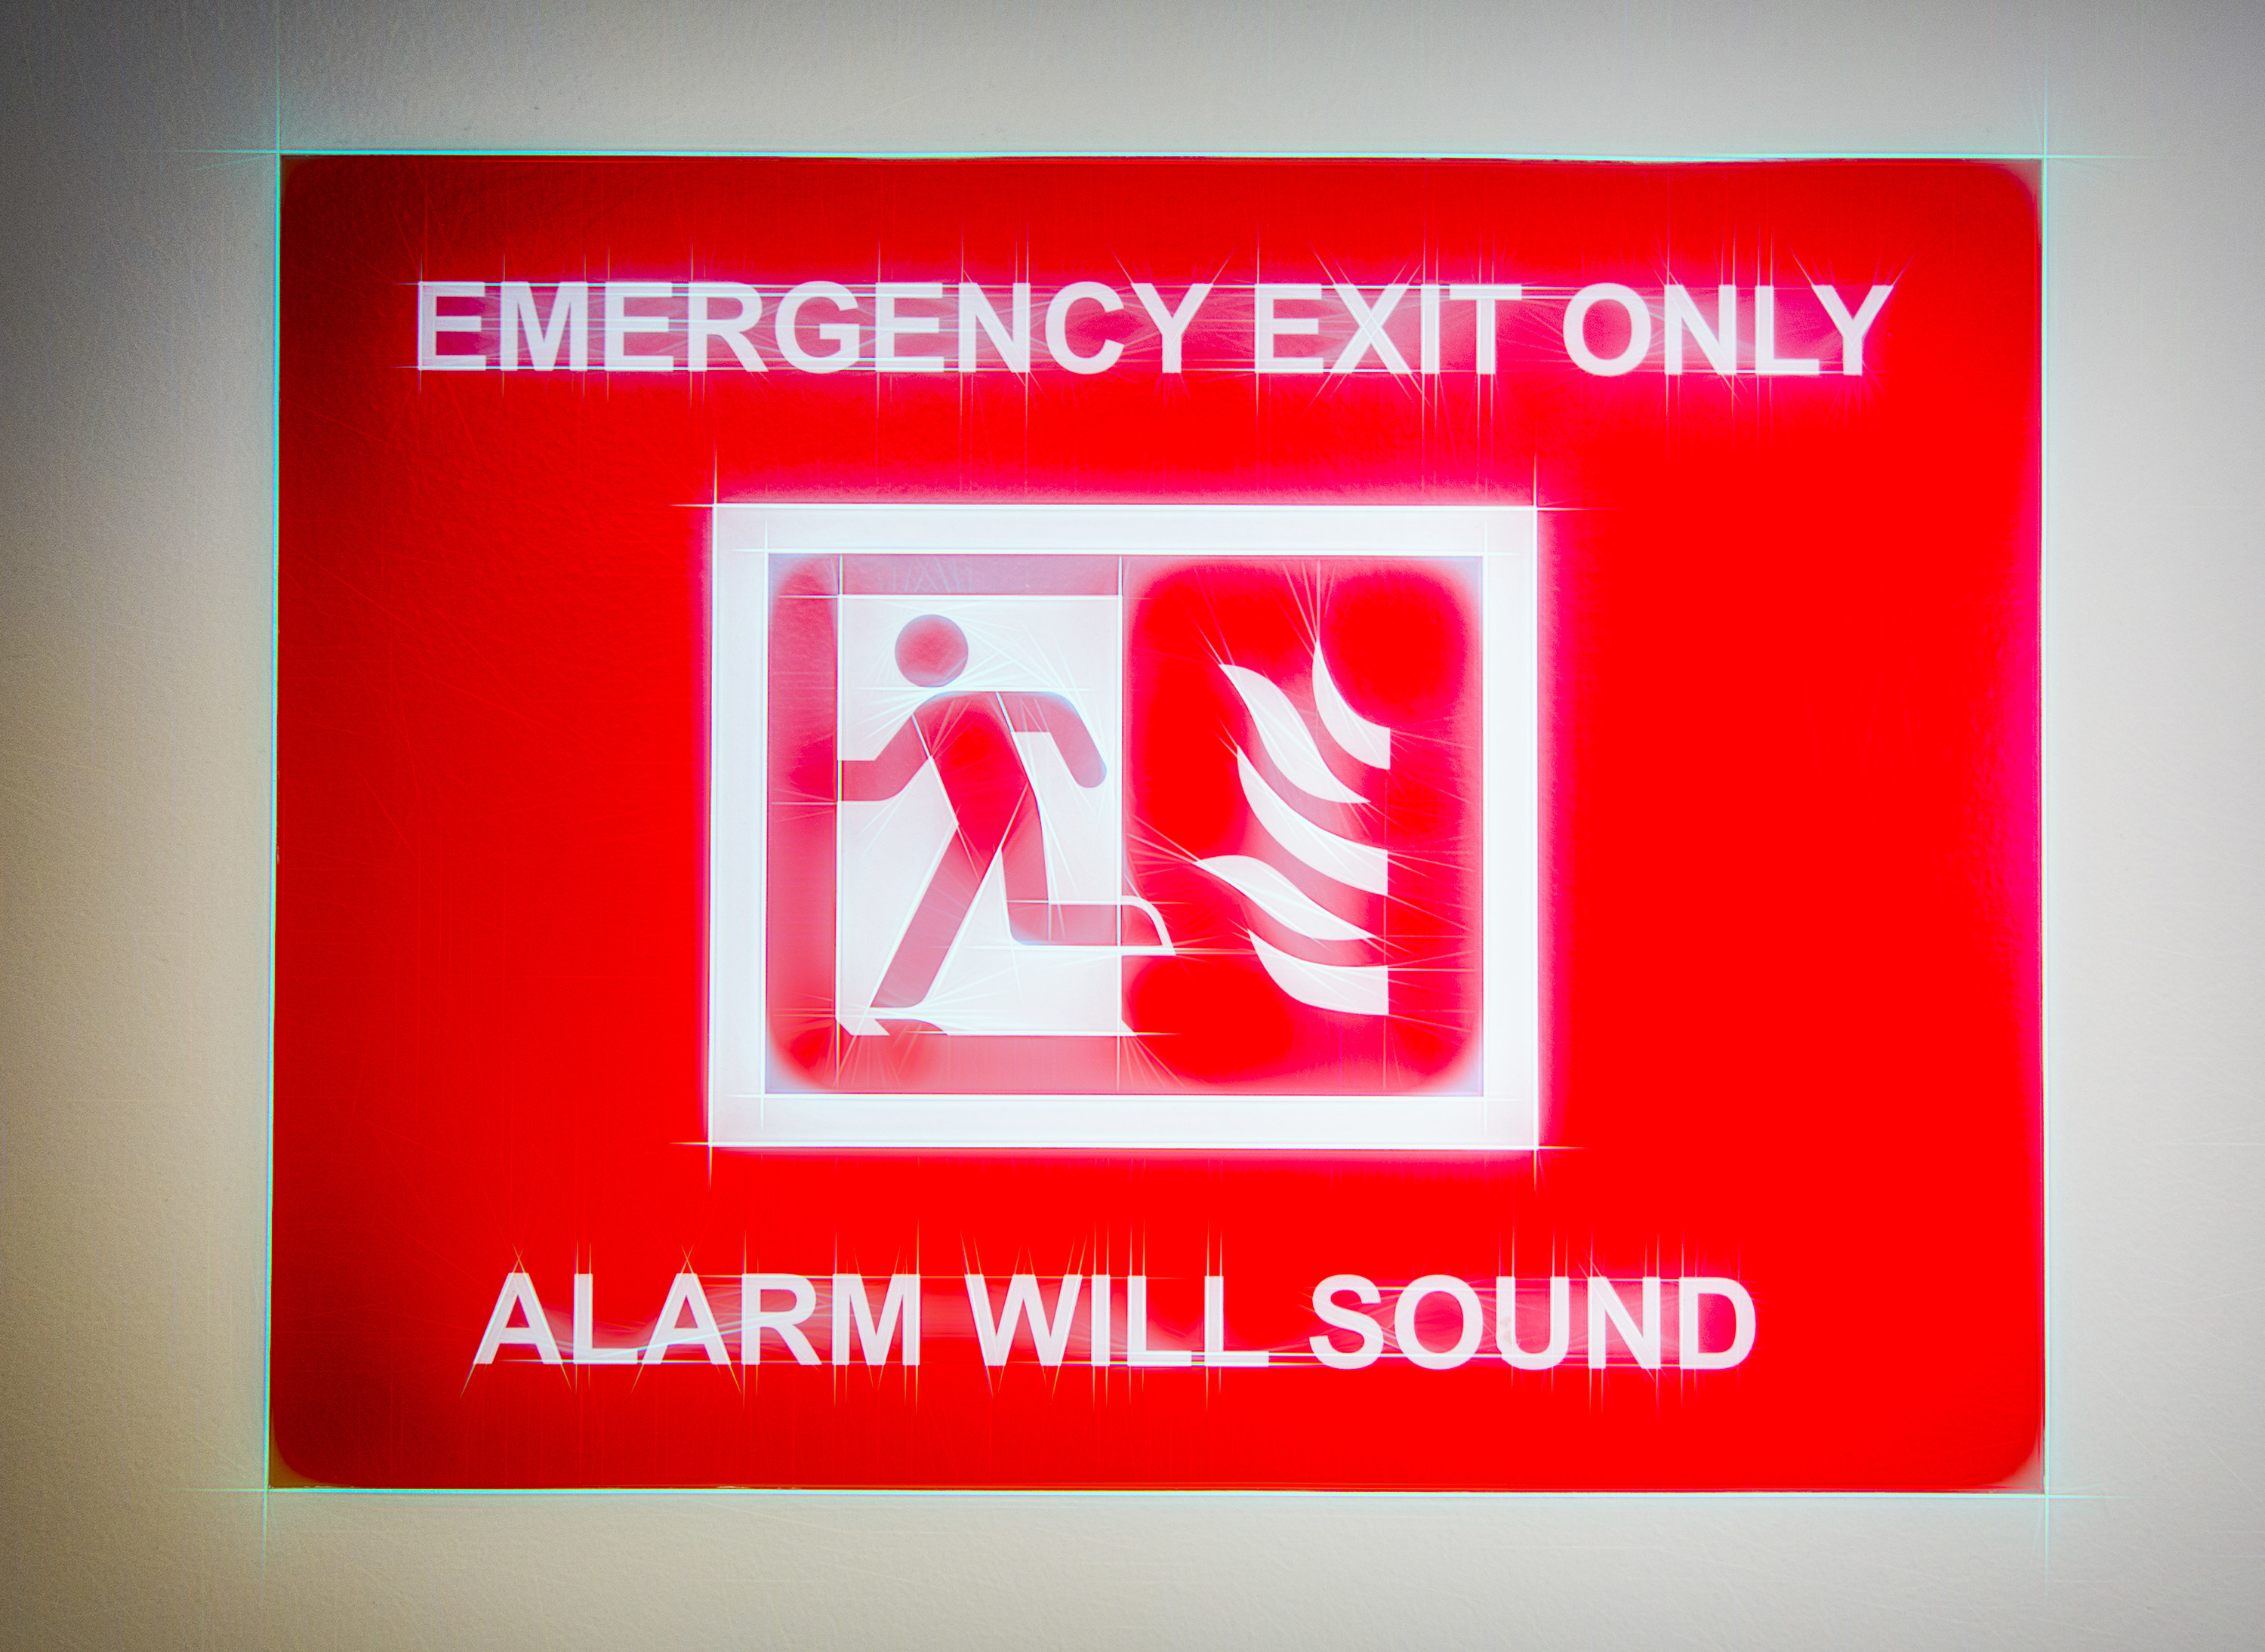 Closeup of Emergency Exit sign with text Emergency Exit Only above a diagram of a person running from fire, with Alarm Will Sound text below